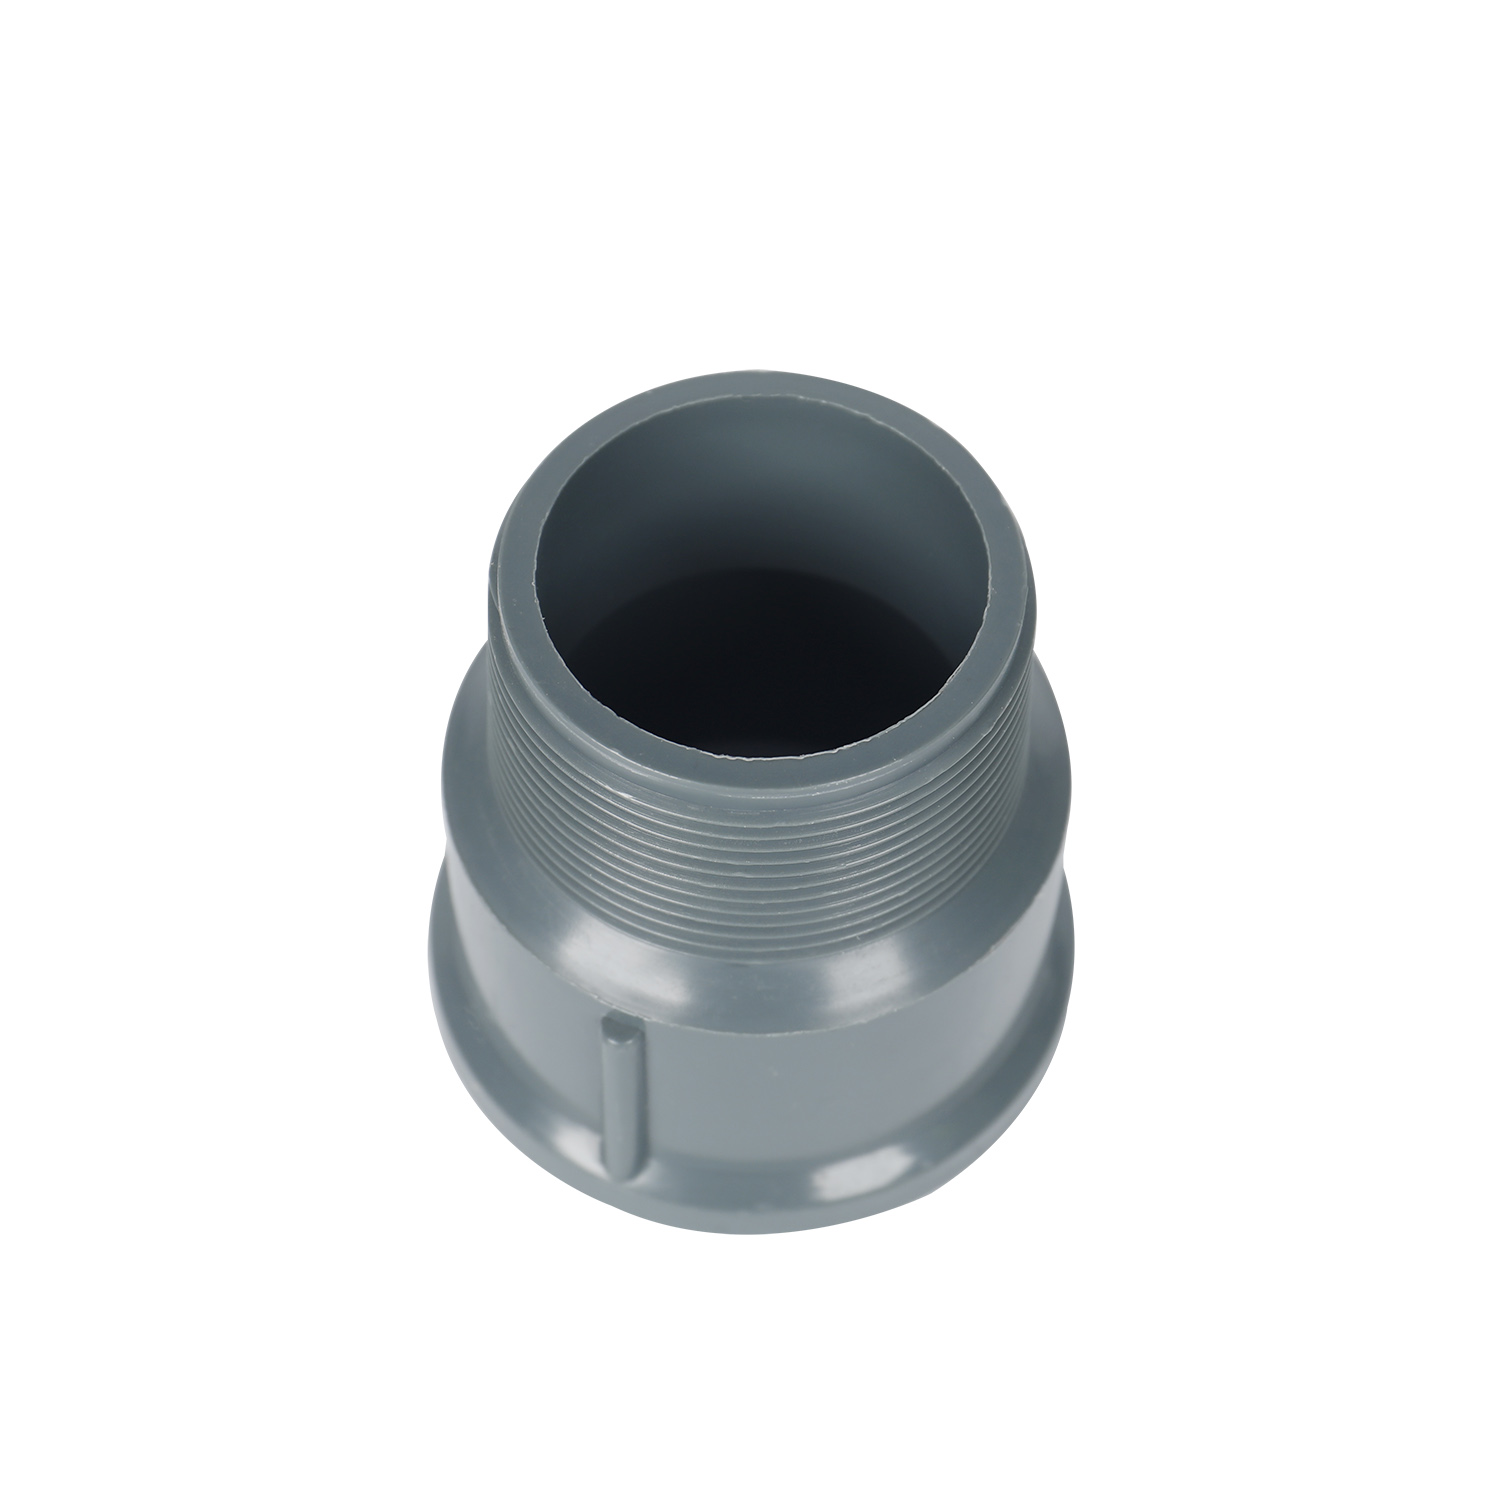 Factory wholesale high quality plastic pvc pipe plumbing fittings manufacturers PVC Threaded male adapter